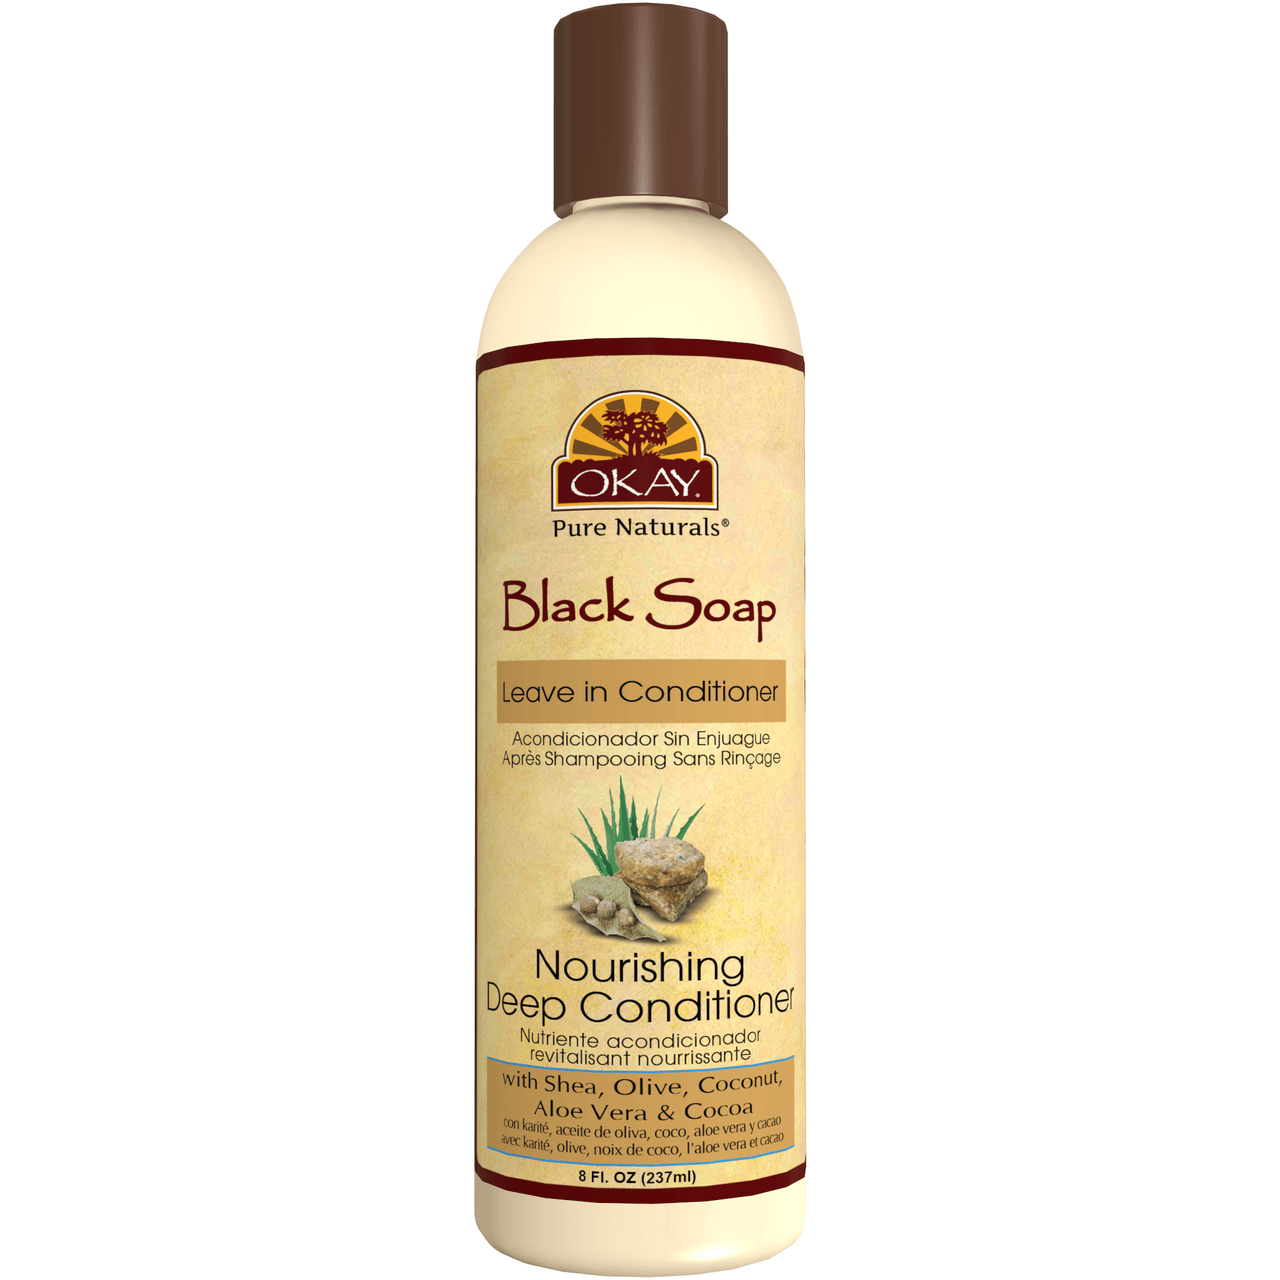 Okay African Black Soap Leave-in Conditioner, 8oz